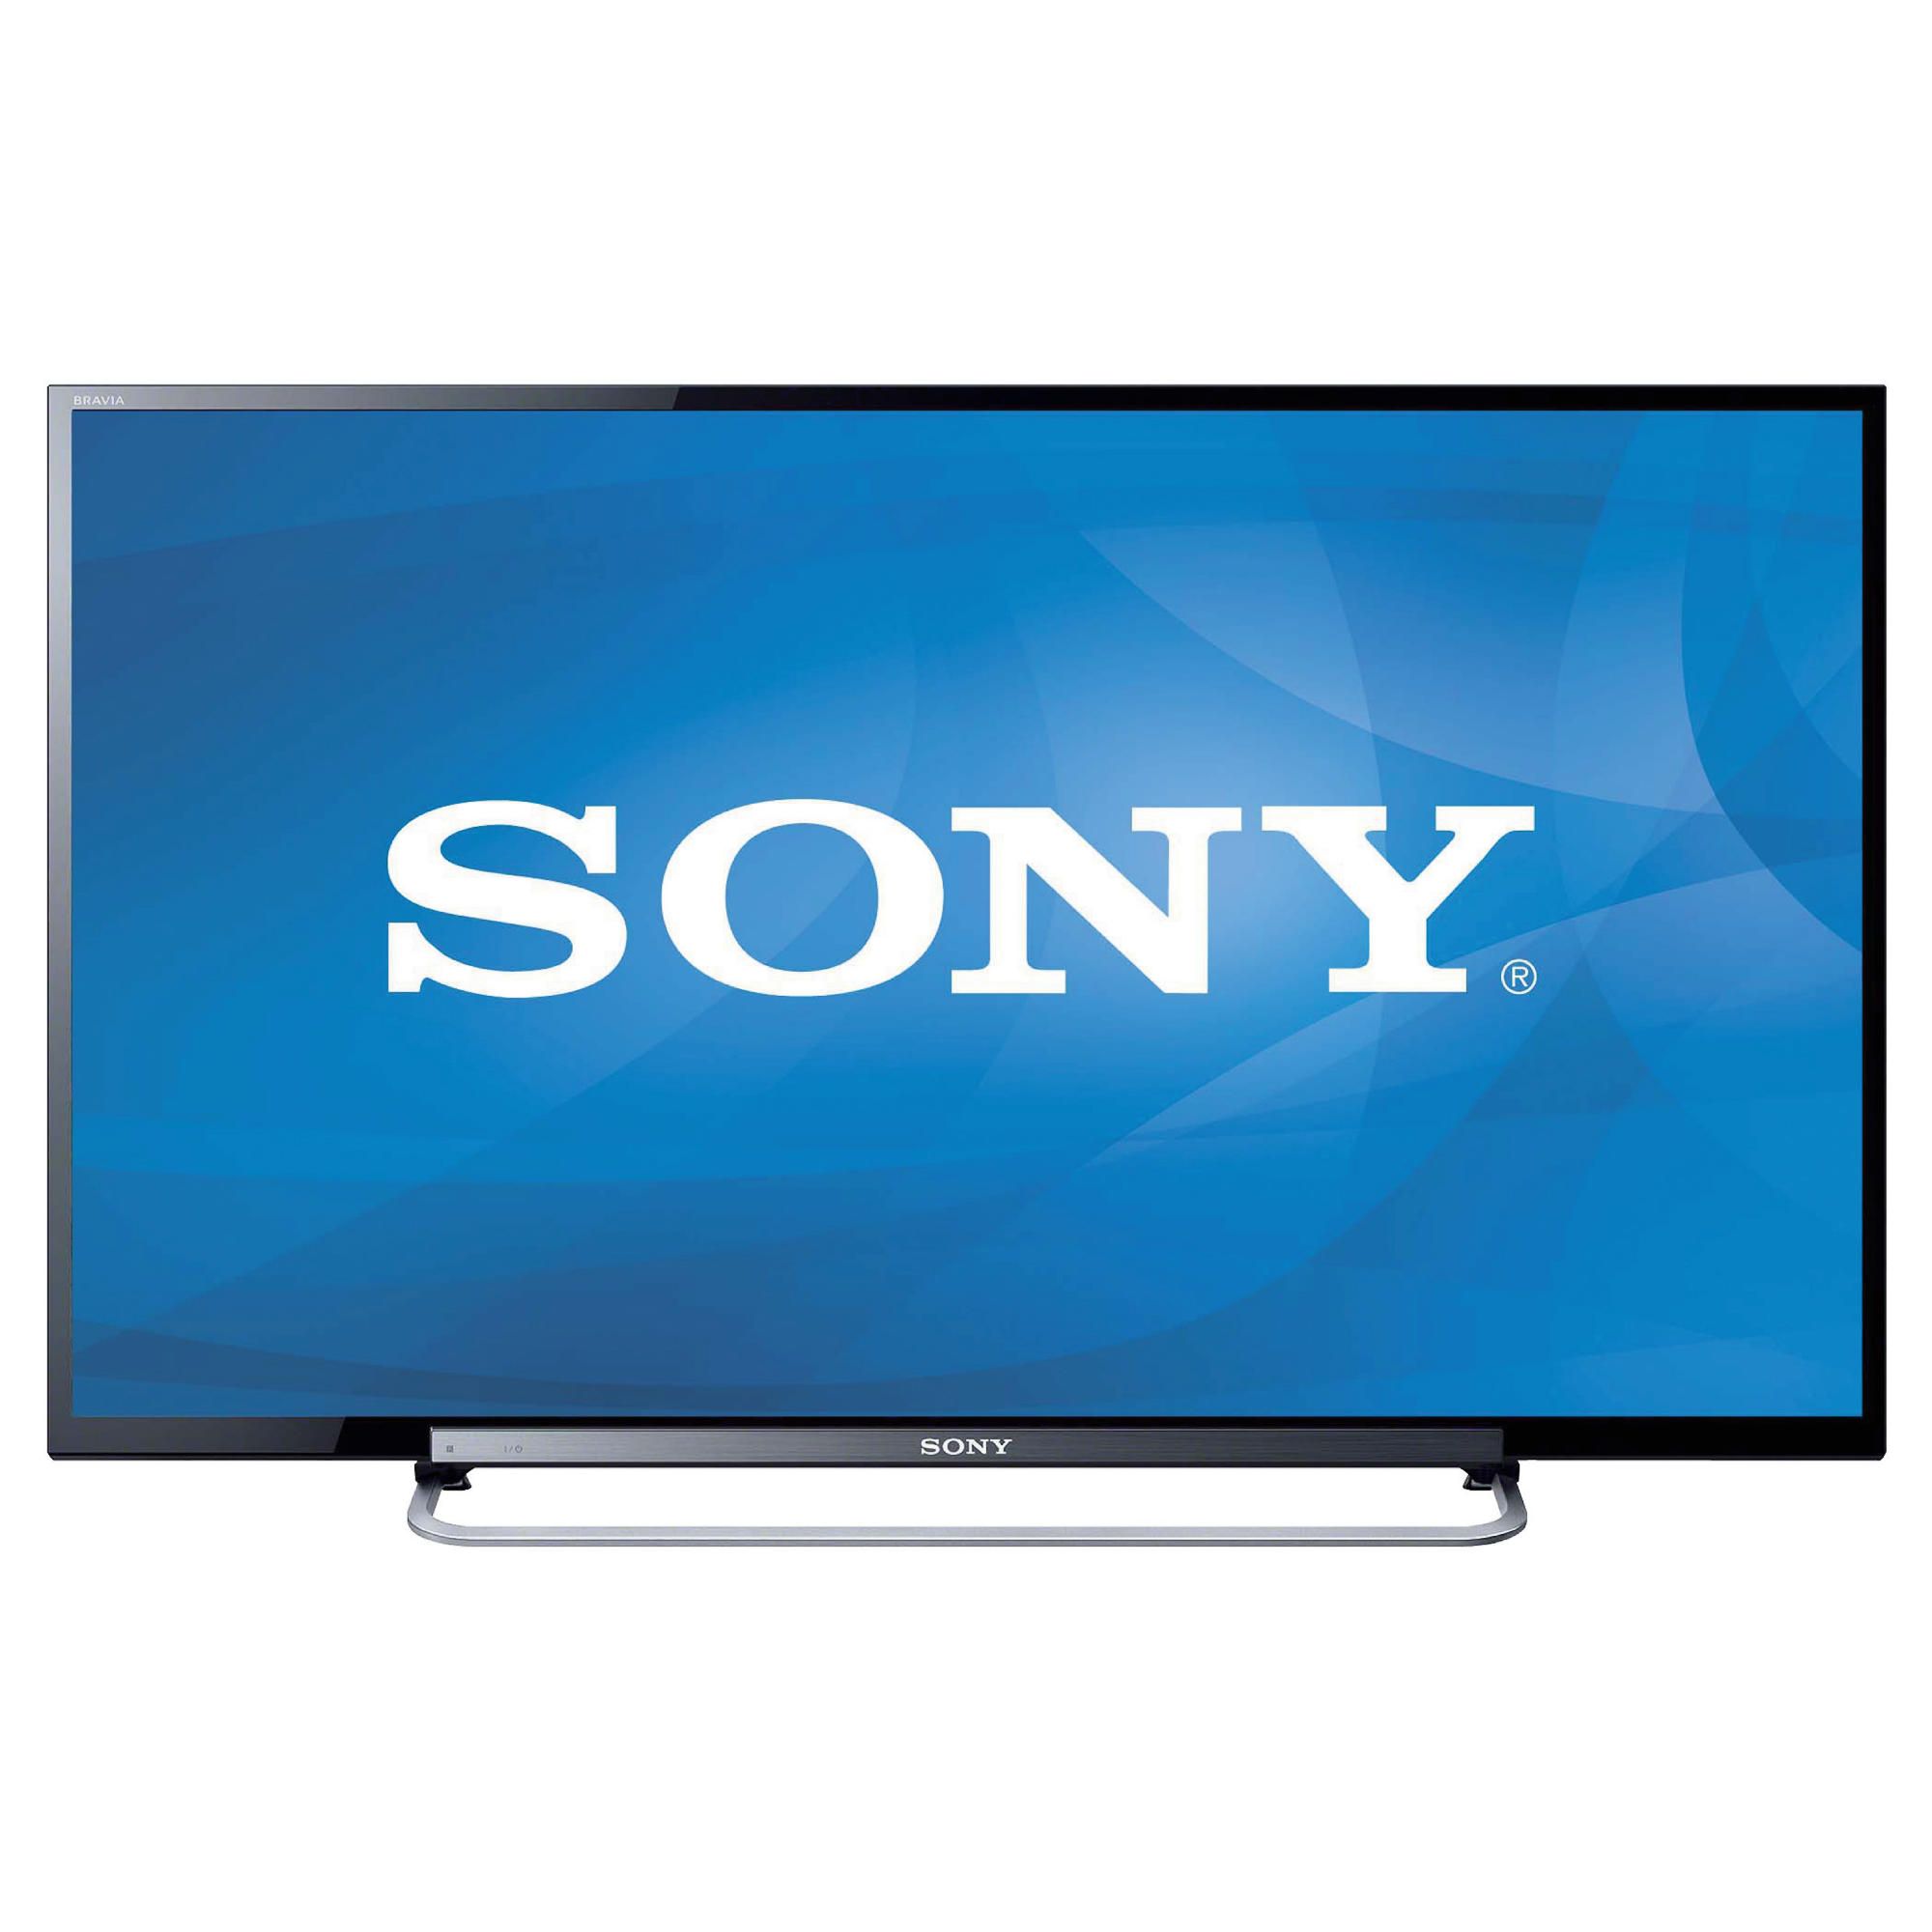 Sony KDL40R473ABU 40 Inch 1080P HD LED TV with Freeview HD